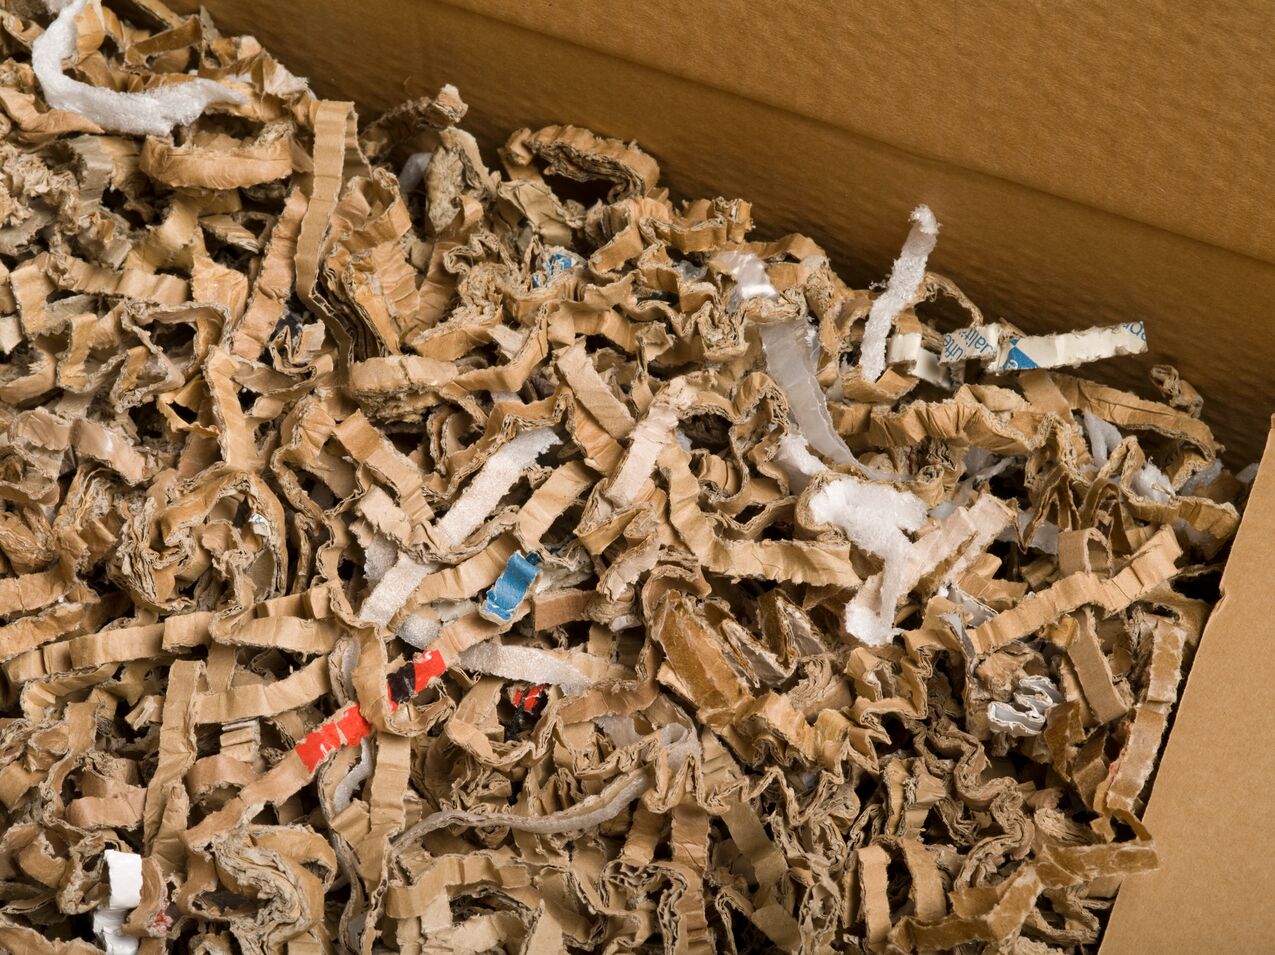 A box filled with shredded cardboard ready to be recycled.